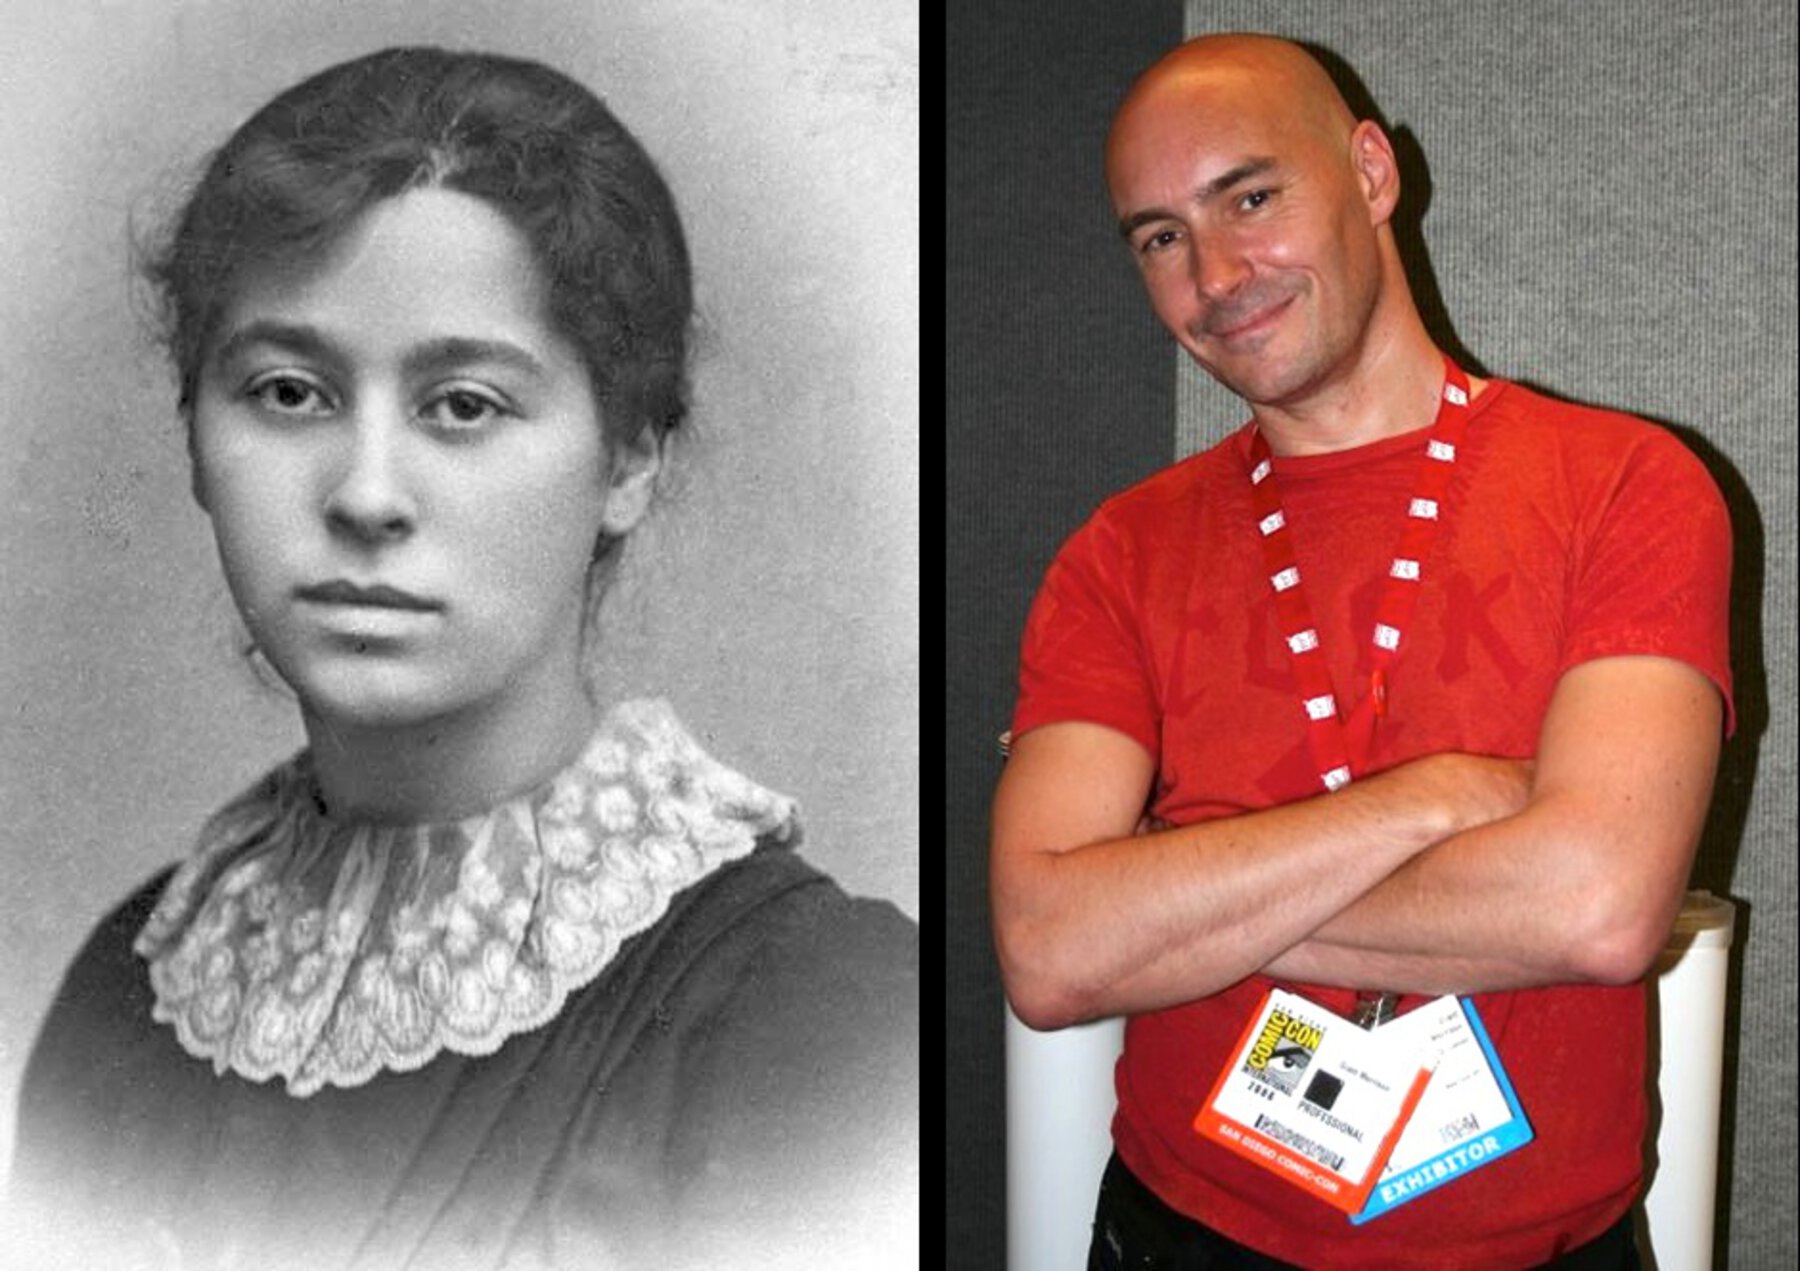 (Left) Head and shoulders portrait of Amy Levy. (Right) Head and shoulders portrait of Grant Morrison.